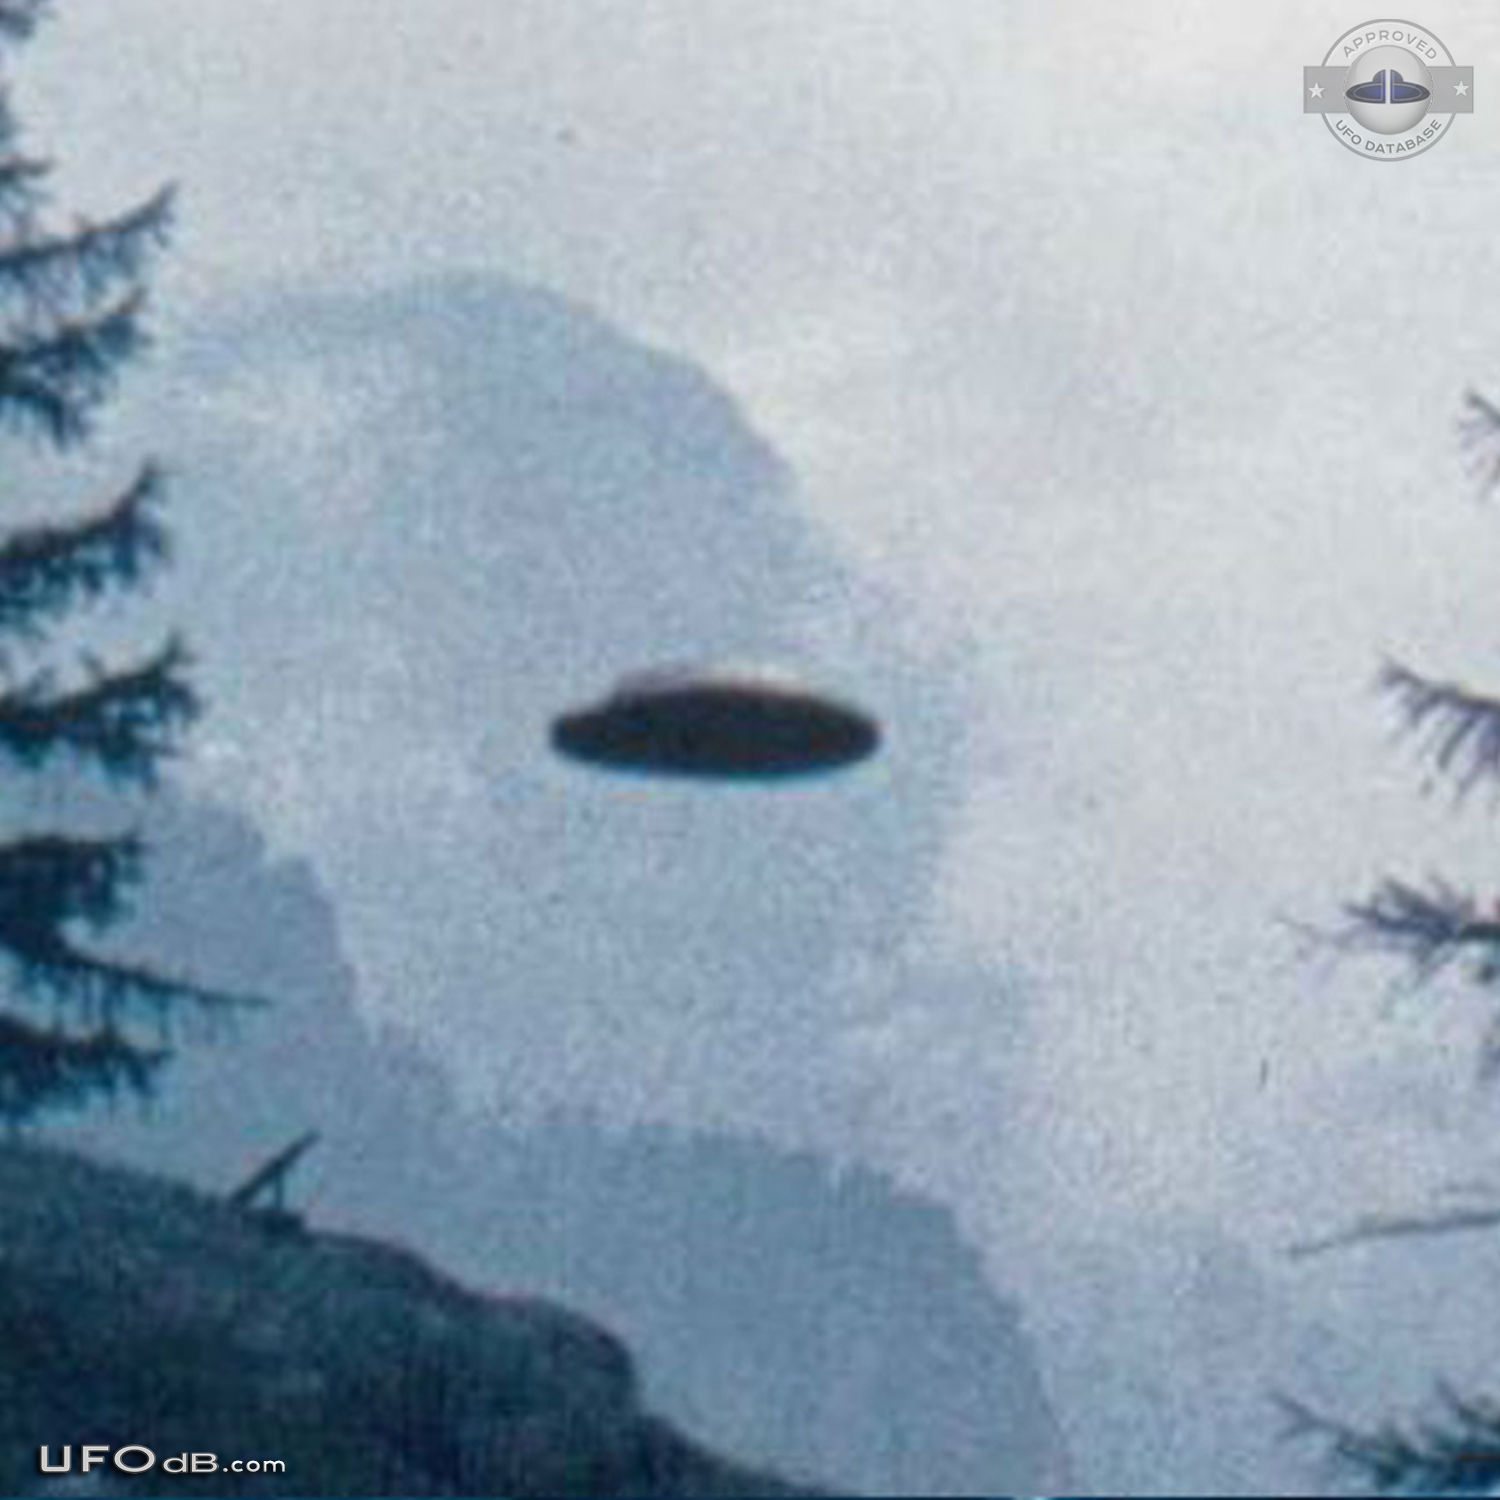 One of the Best UFO sighting backed by 2 UFO pictures Switzerland 1975 UFO Picture #459-4